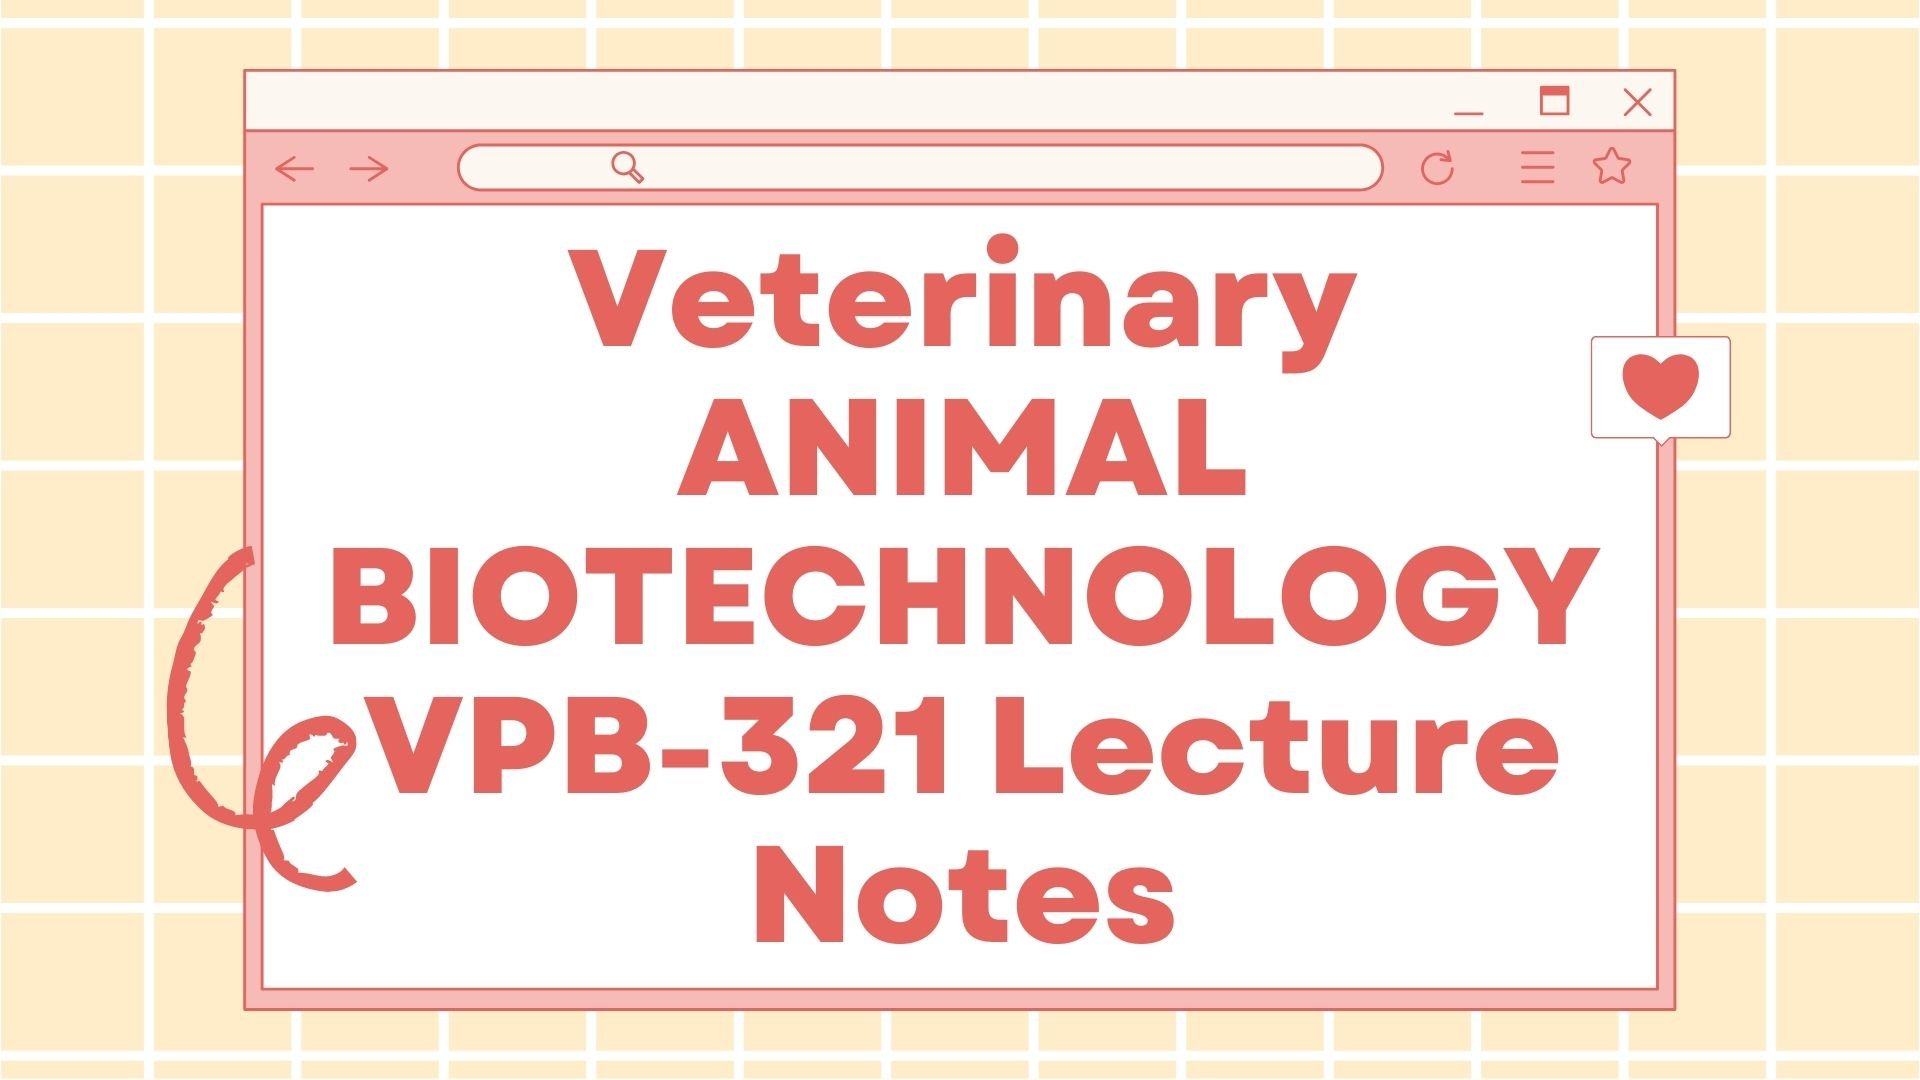 Veterinary ANIMAL BIOTECHNOLOGY VPB-321 Lecture Notes